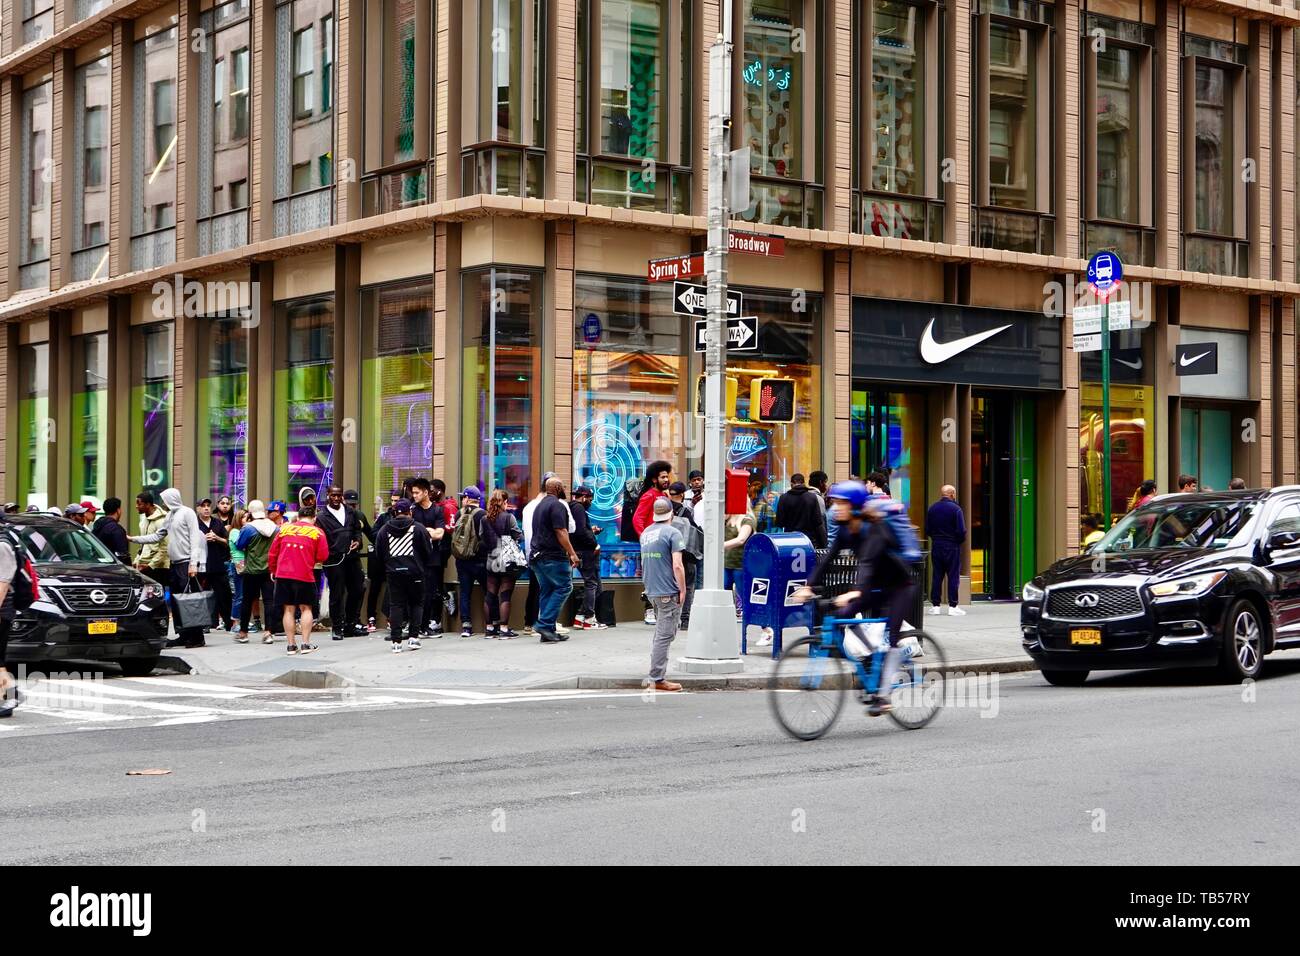 Nike Store High Resolution Stock Photography and Images - Alamy